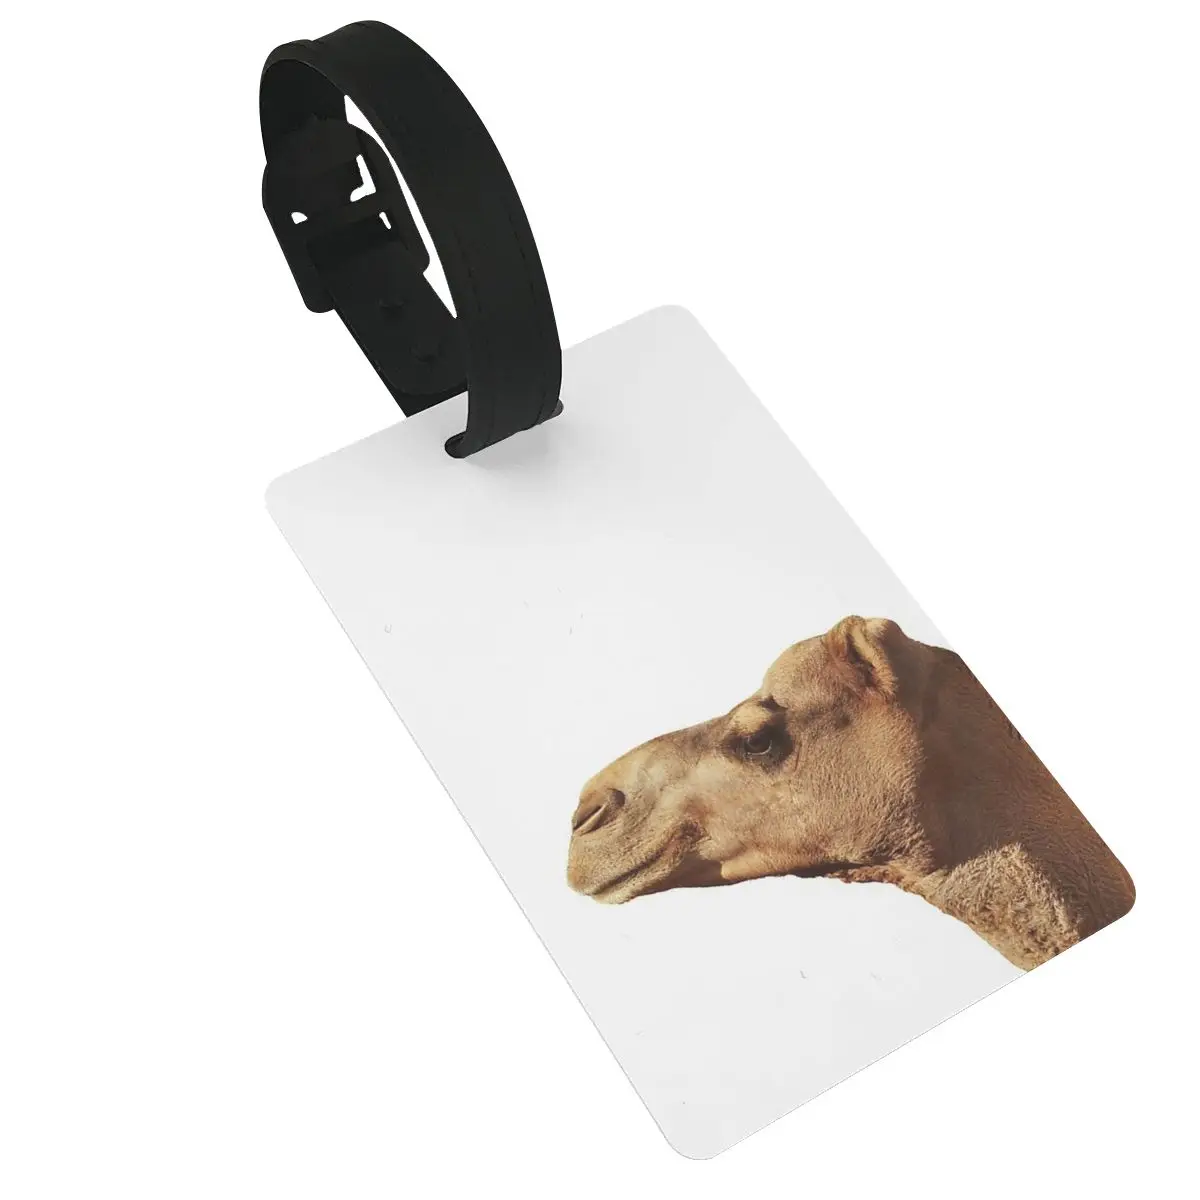 

Smiling Camel Head Mouse Pad Luggage Tags Suitcase Accessories Travel Baggage Boarding Tag Portable Label Holder ID Name Address